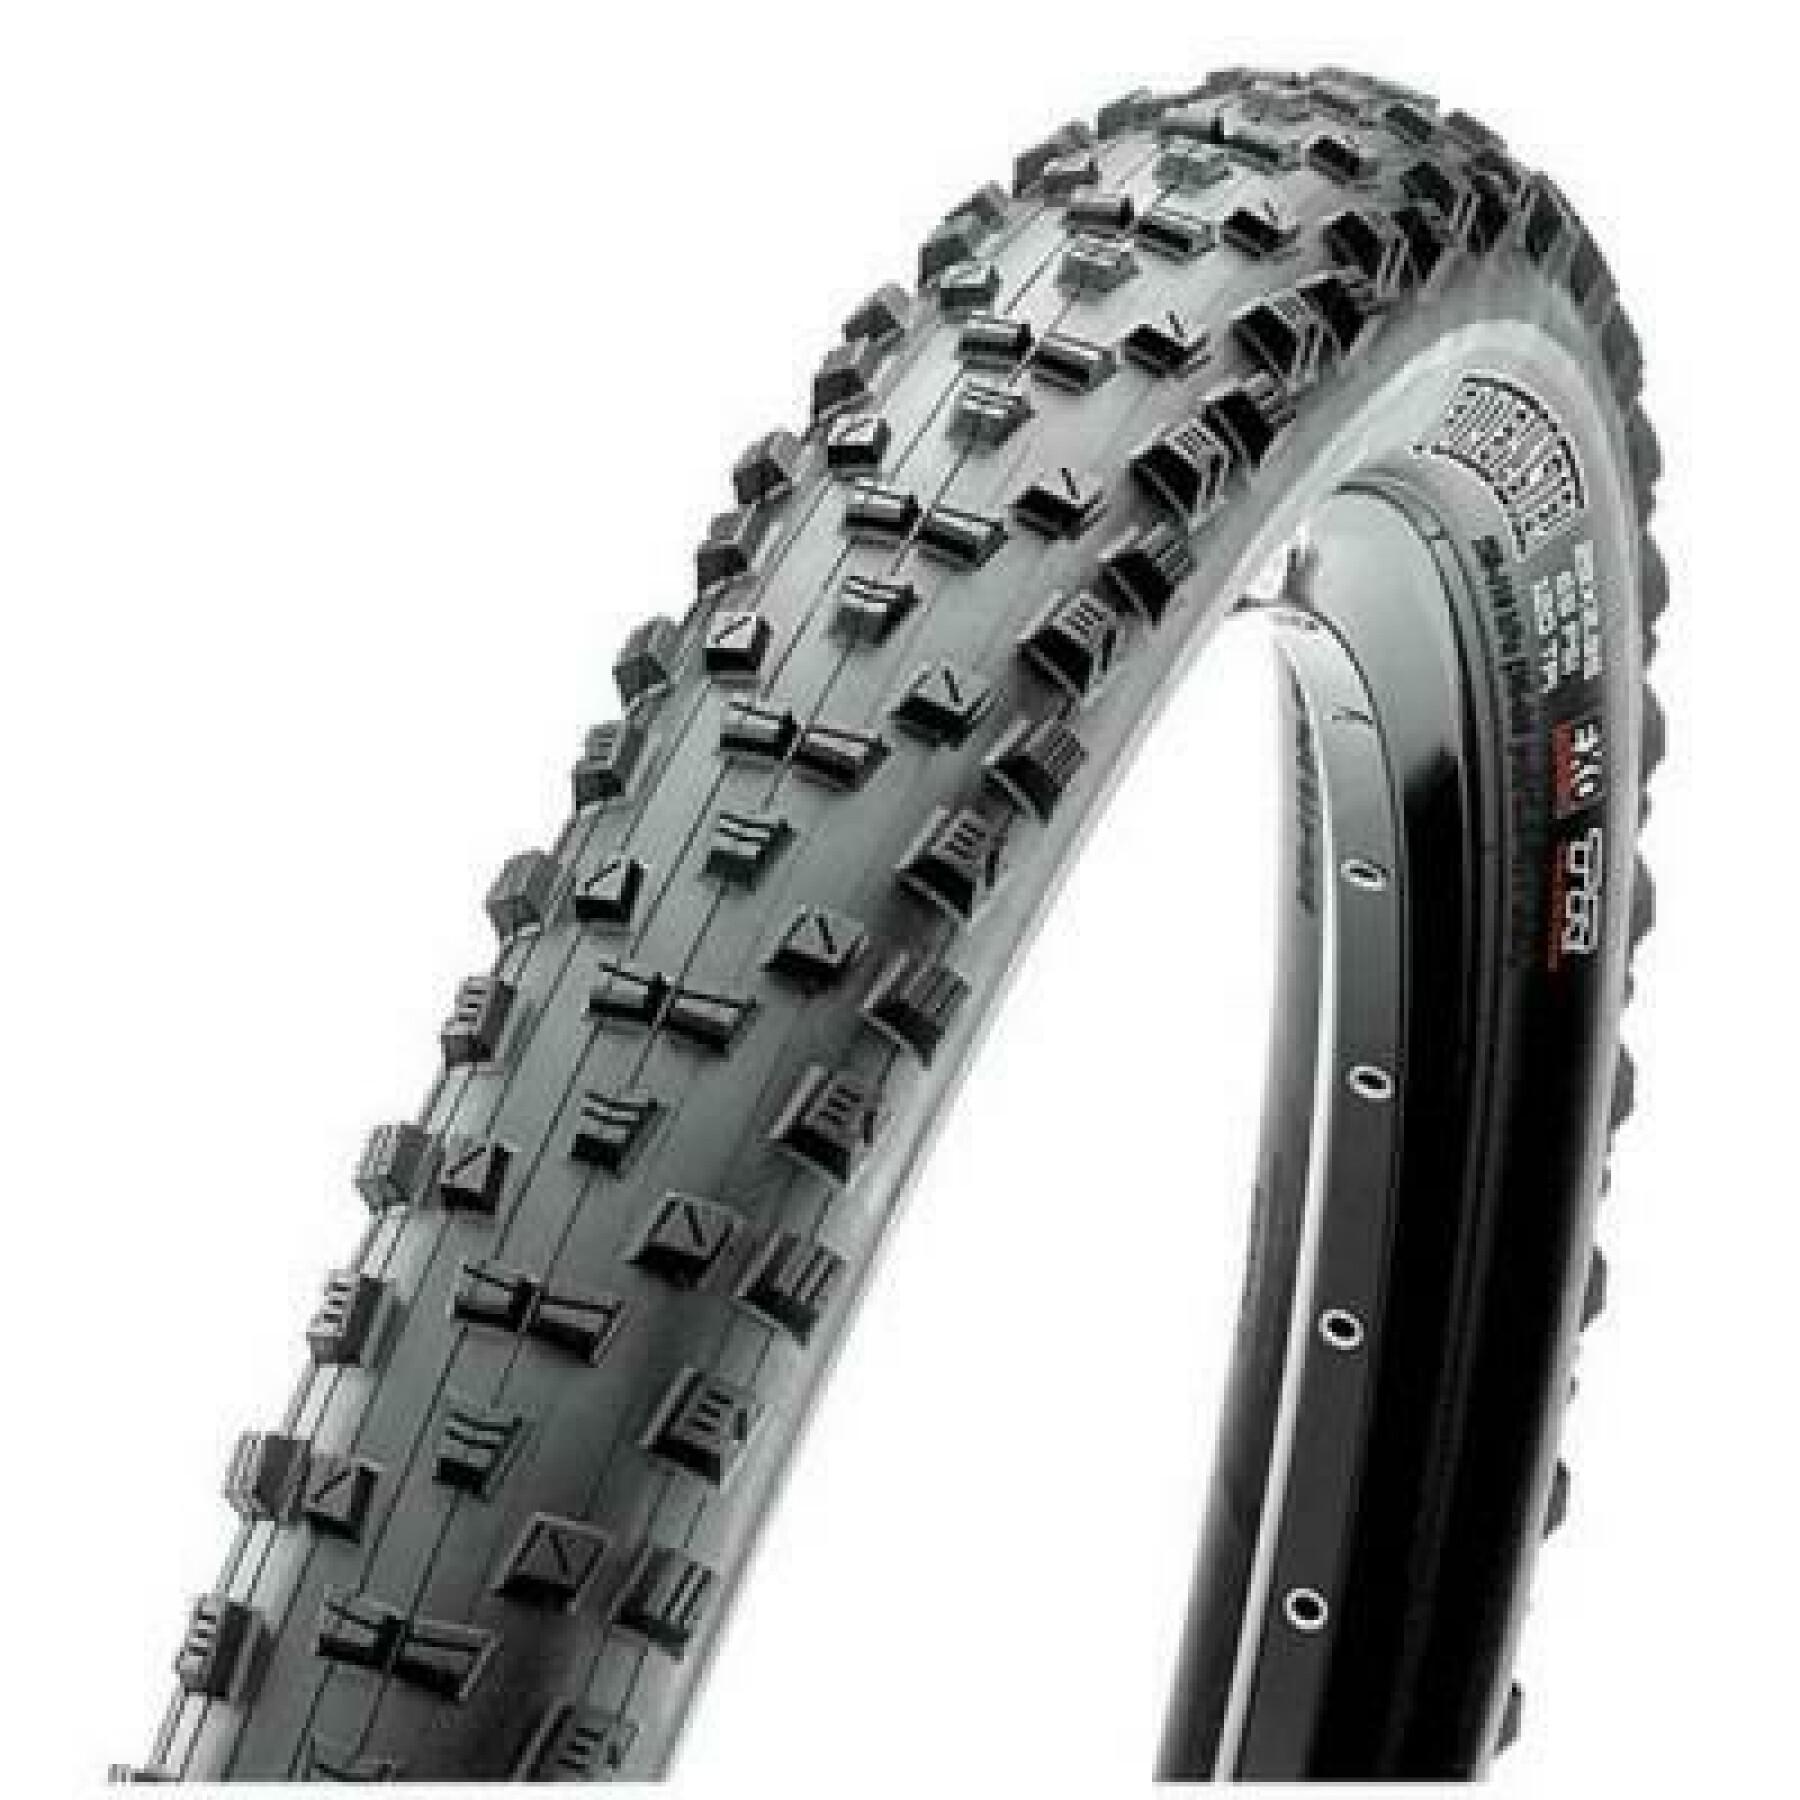 Zachte band Maxxis Forekaster Tubeless Ready Exo Dual Compound 29x2.20 56 622